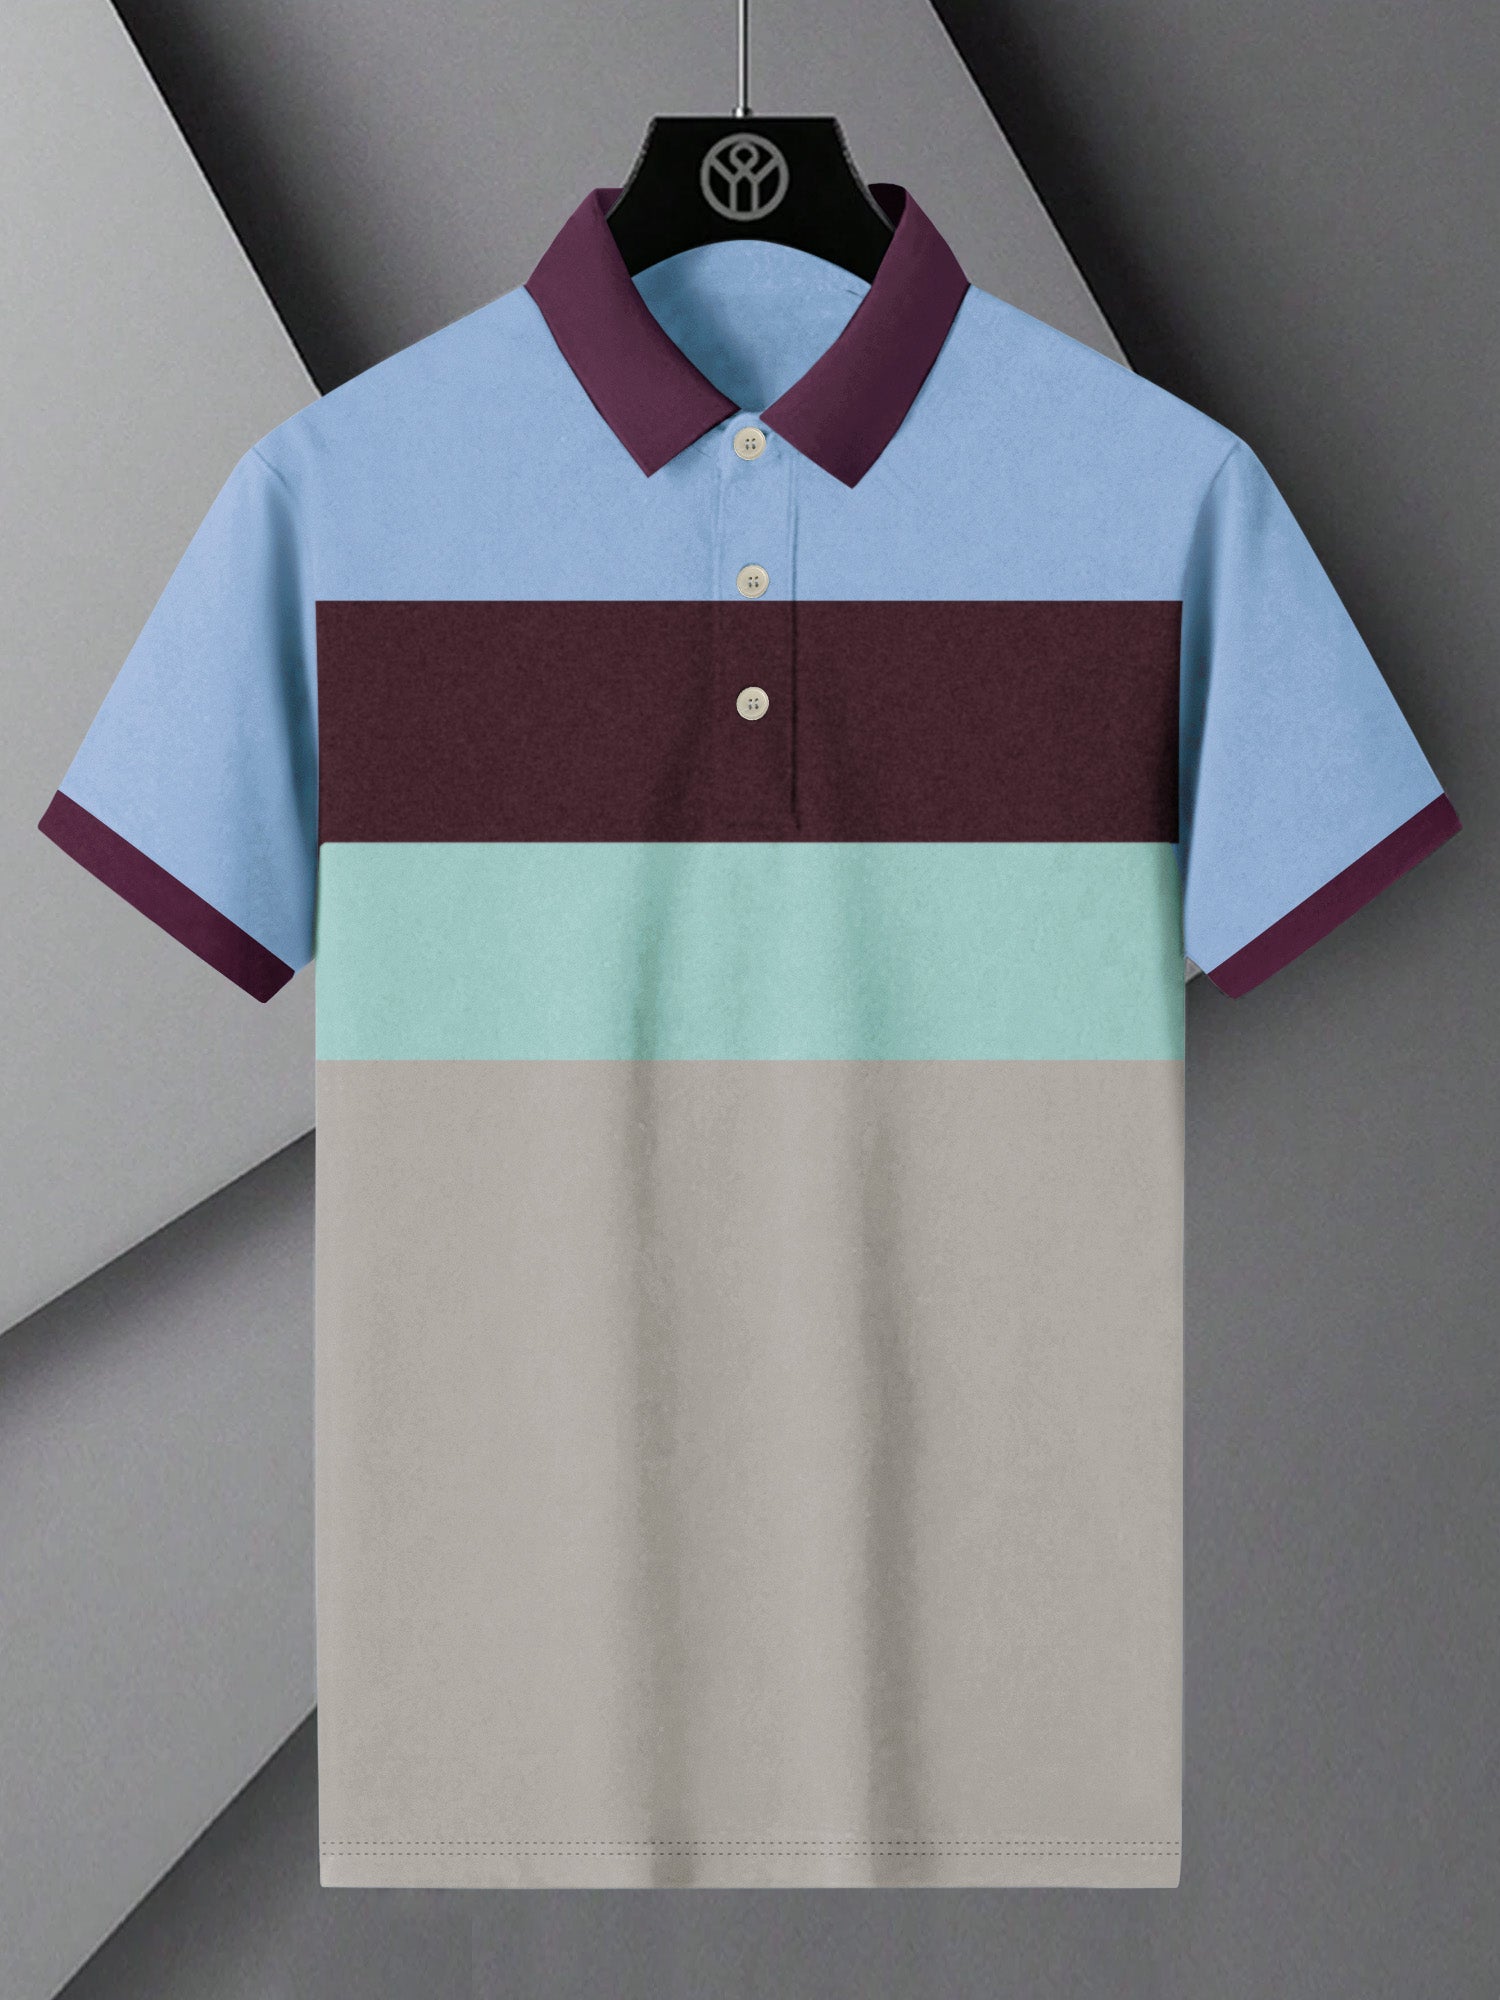 NXT Summer Polo Shirt For Men-Grey with Green & Maroon Stripe-BE710/BR12963